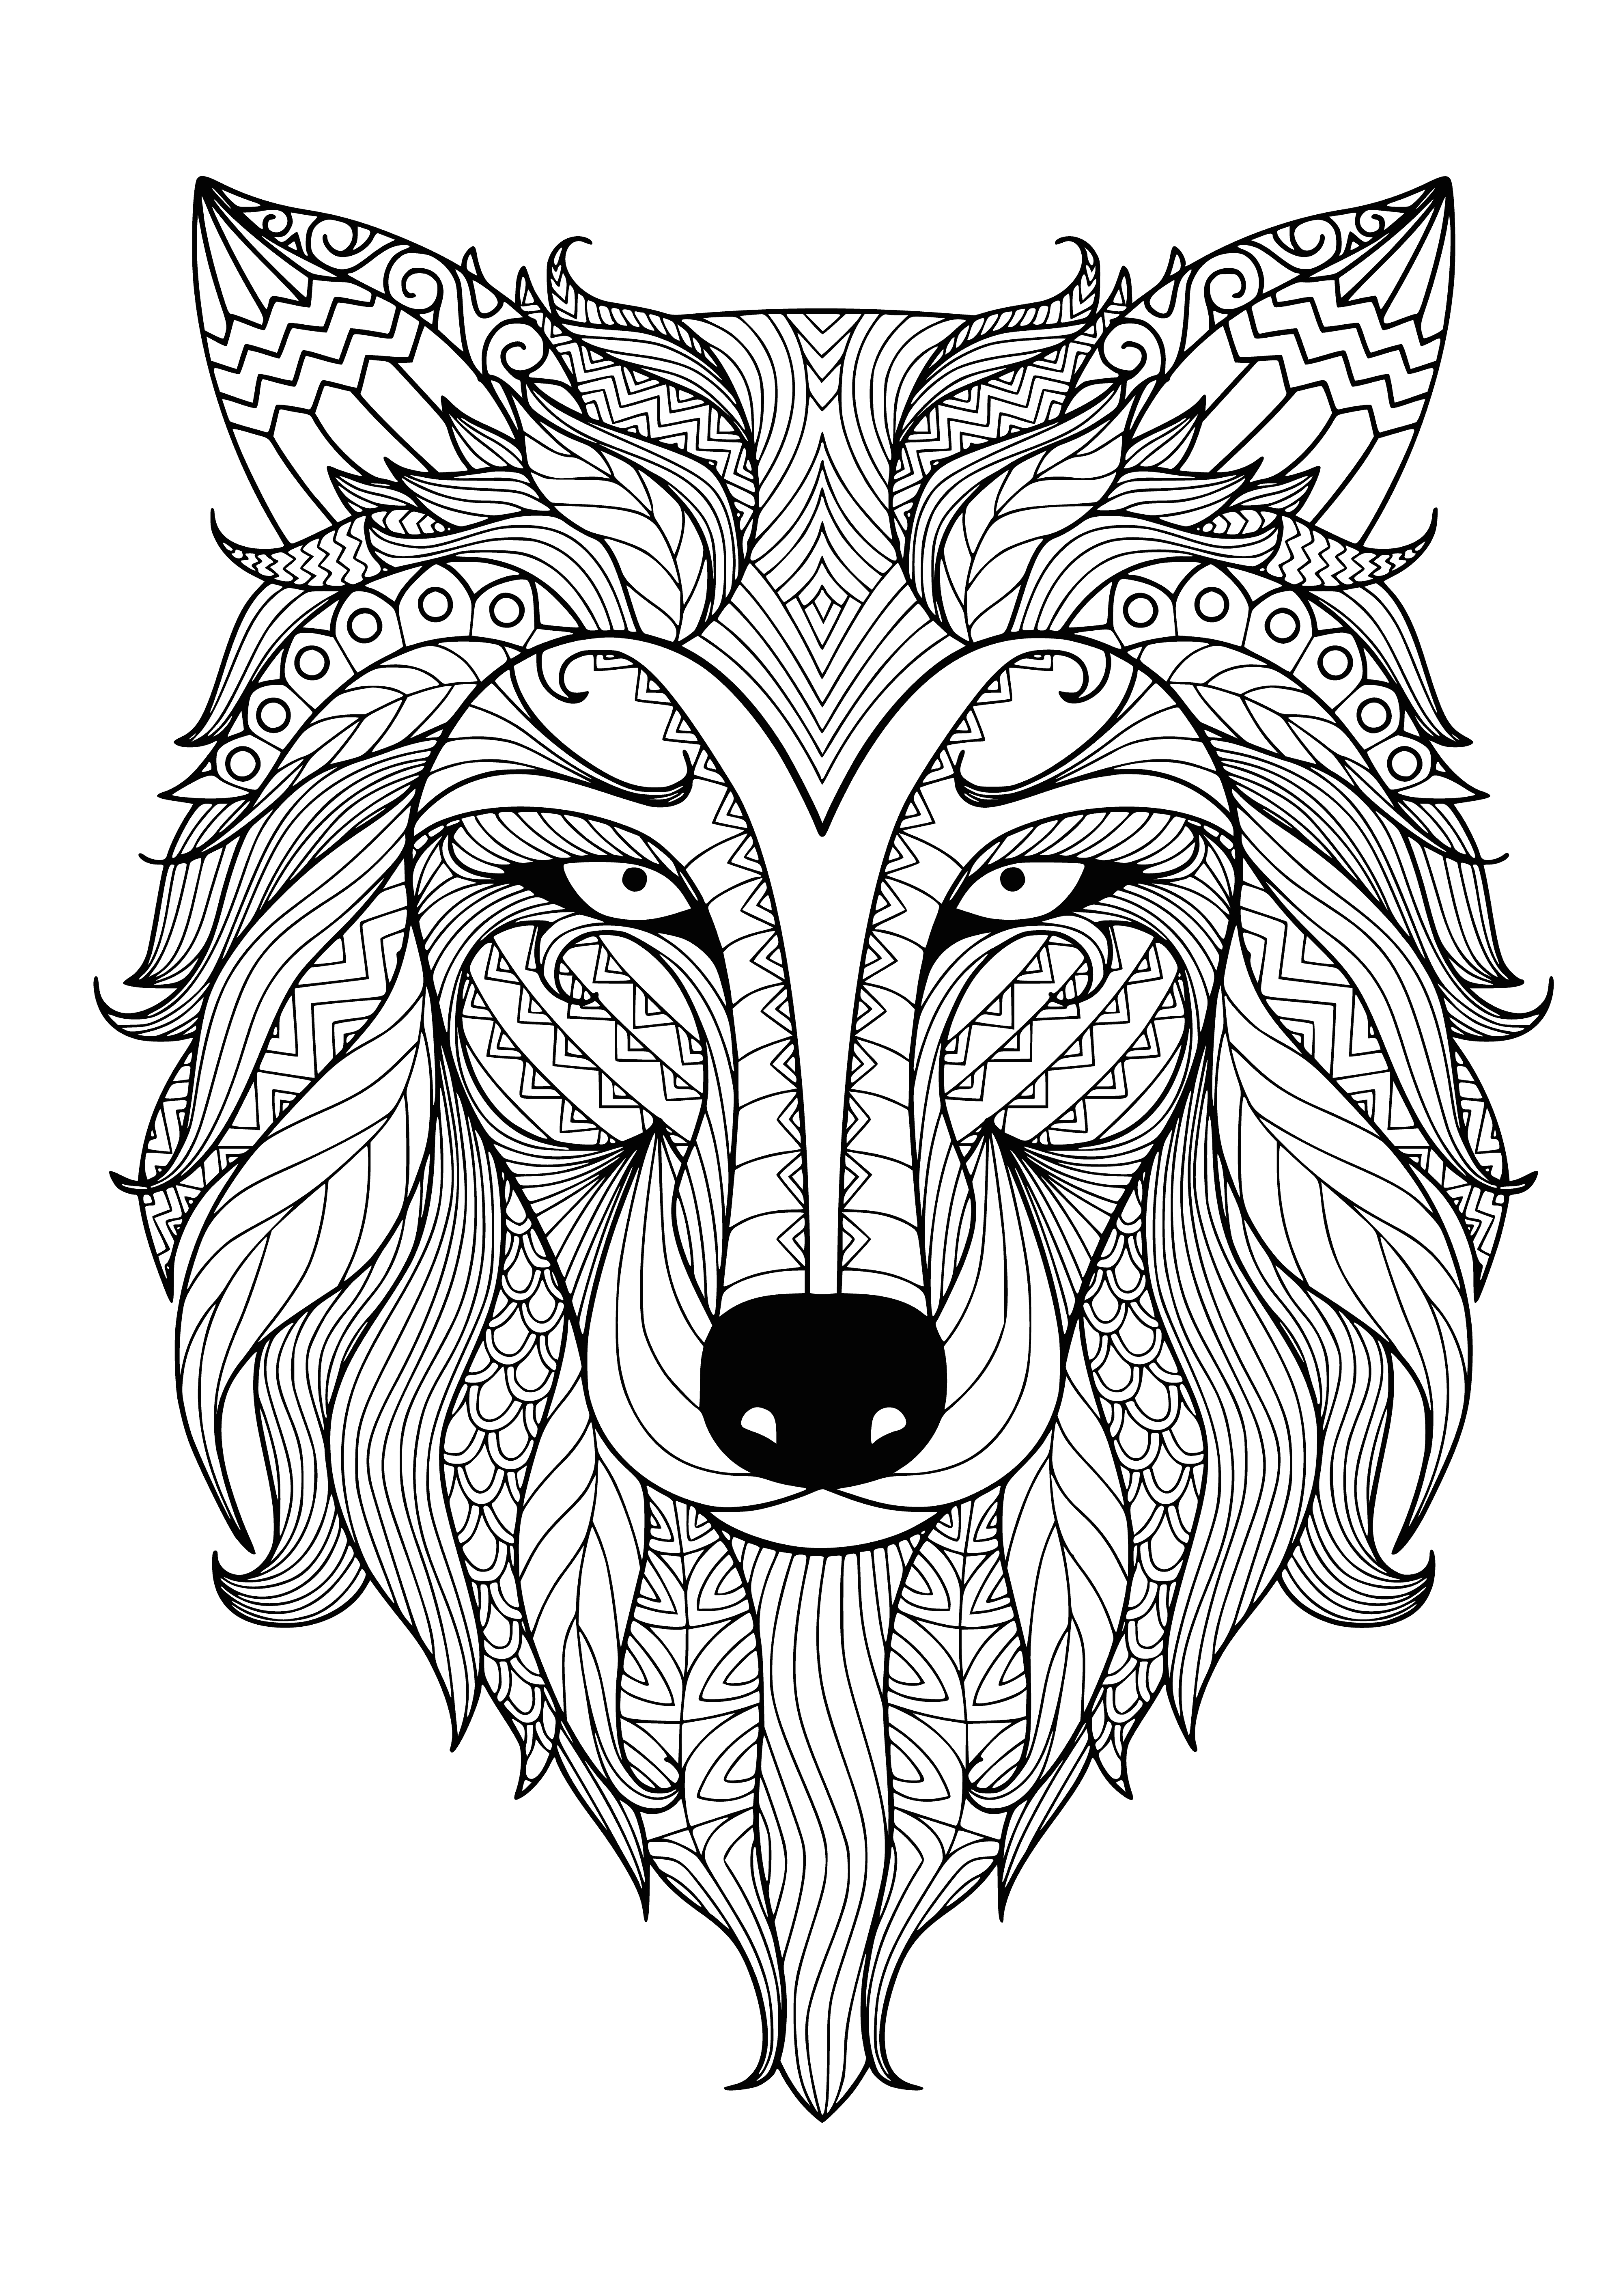 coloring page: Wolf howls at moon in its grey and white beauty.